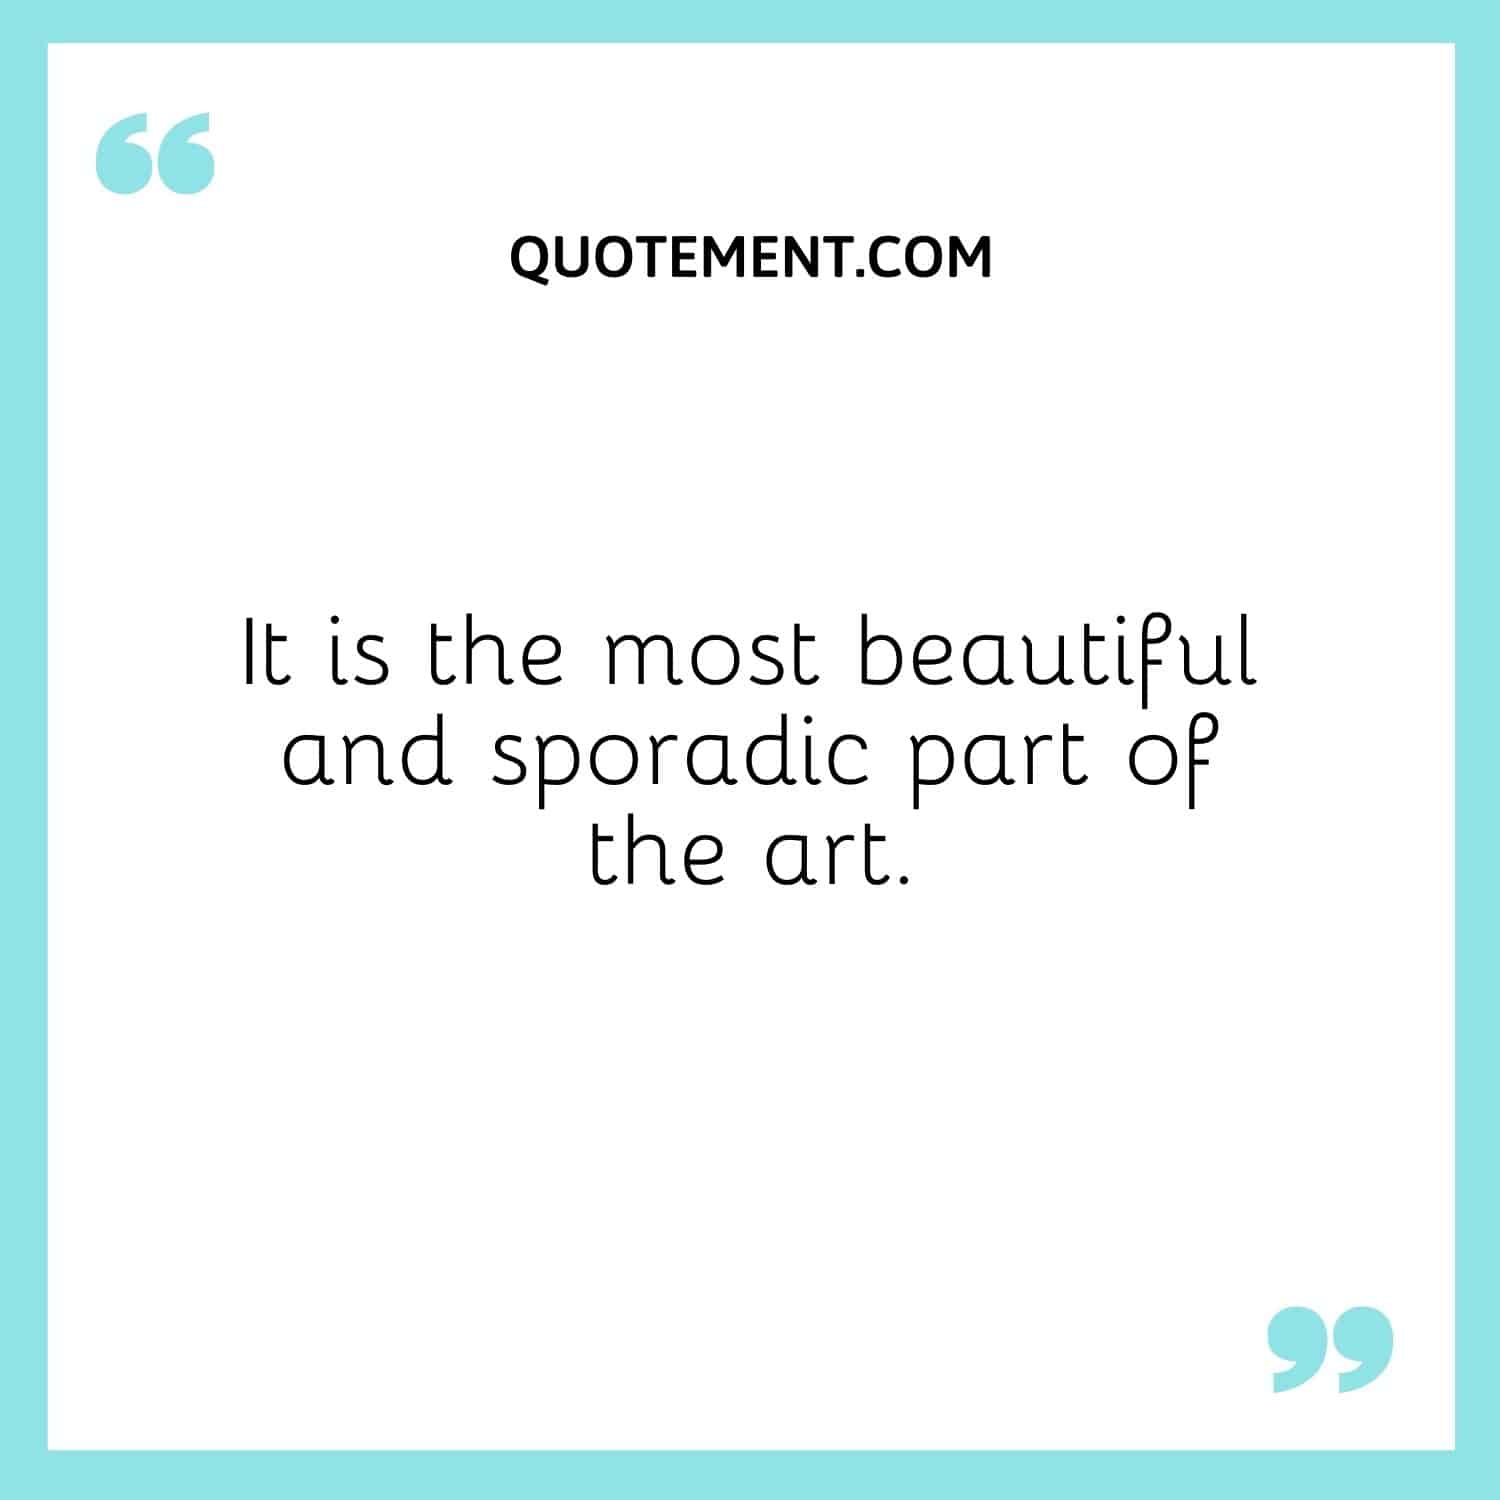 It is the most beautiful and sporadic part of the art.